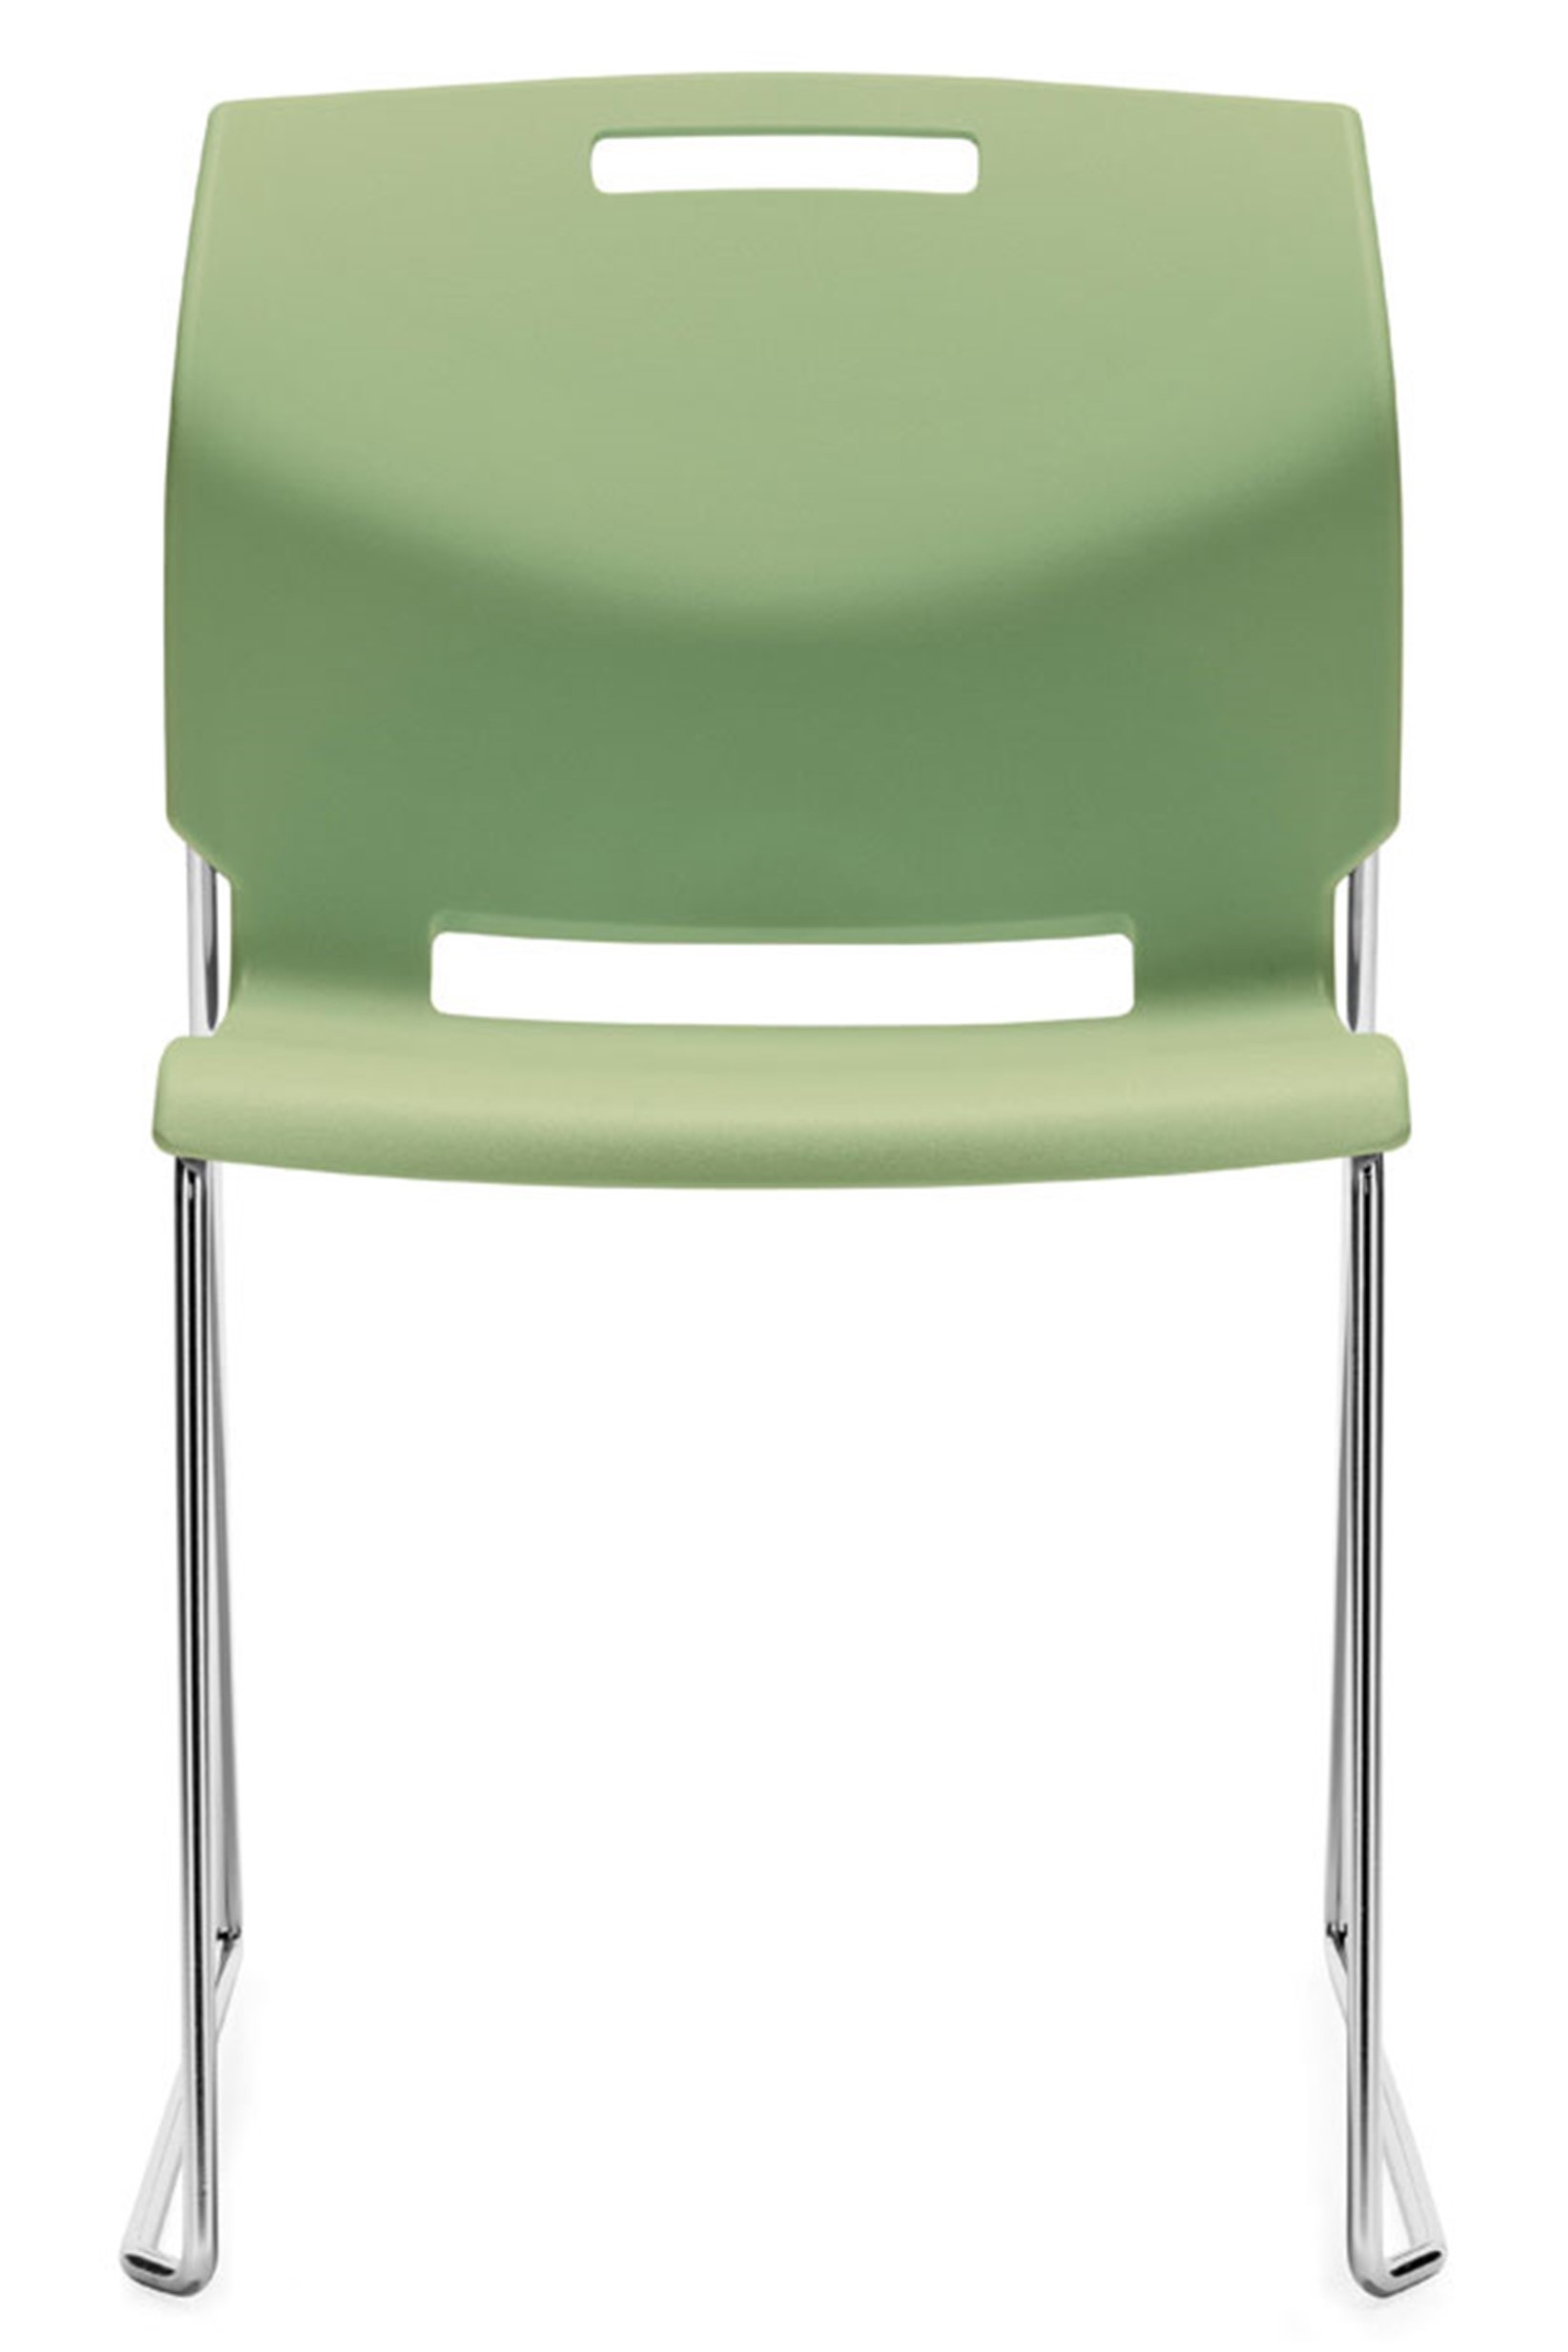 Armless seafoam green plastic high density stack chair with solid bar chrome sled base. Stacks up to 34 high on a dolly.